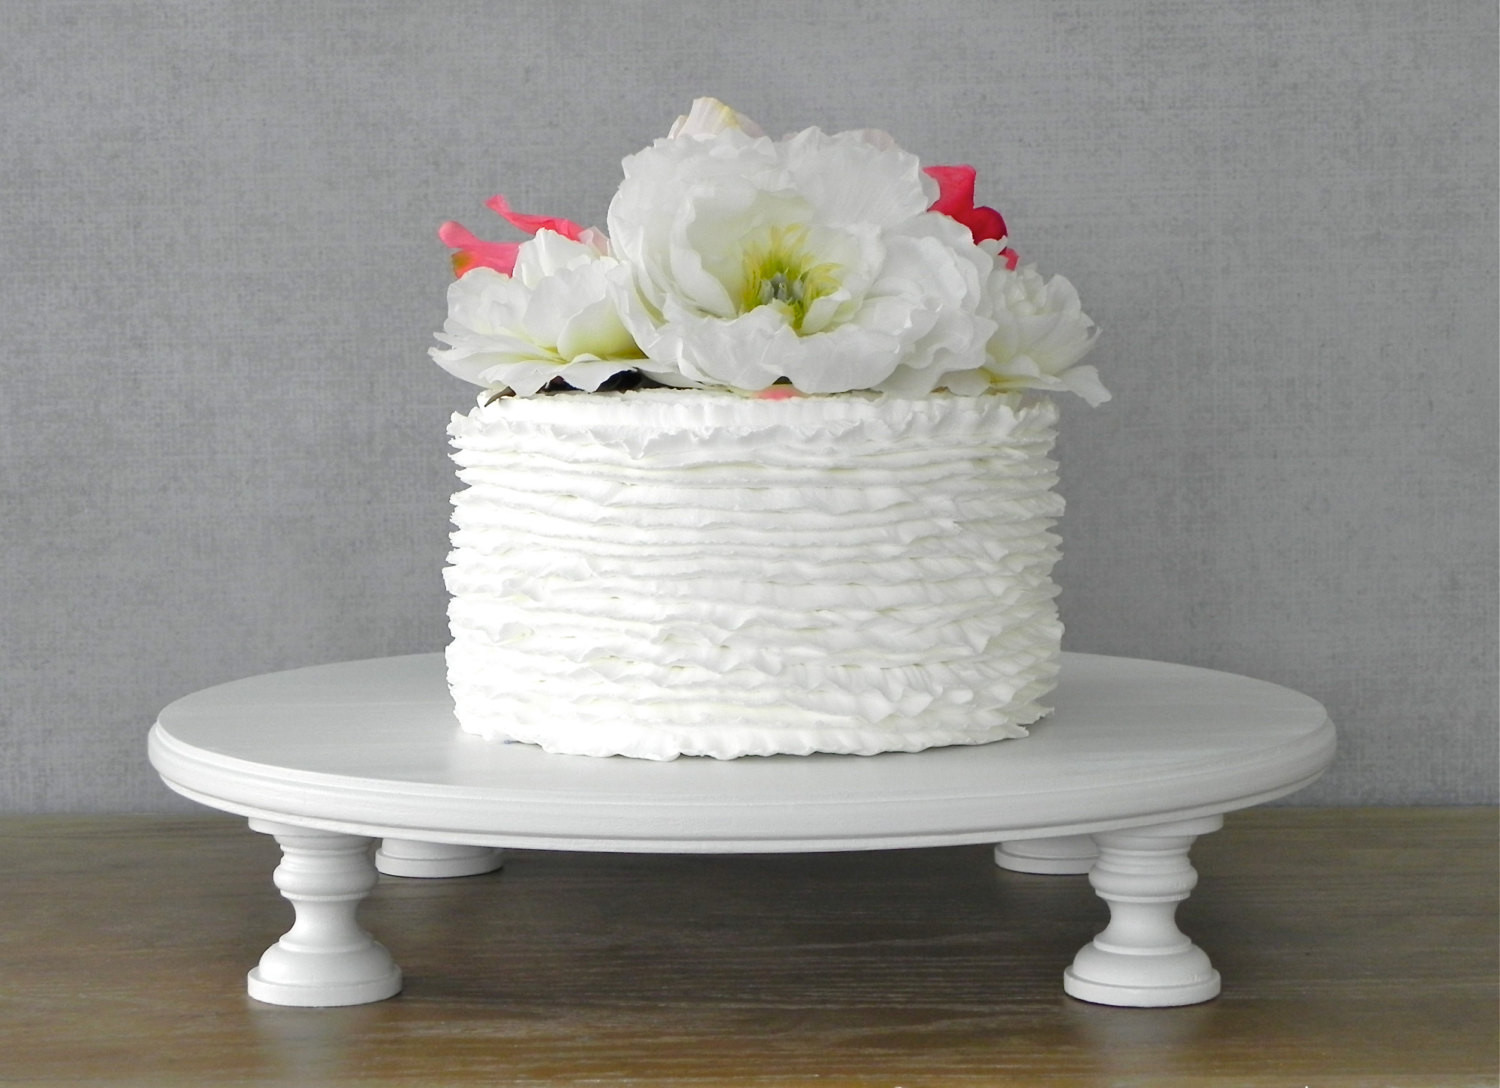 Round Cake Stands For Wedding Cakes
 Cake Stand 14 Wedding Cake Stand Cupcake Round White